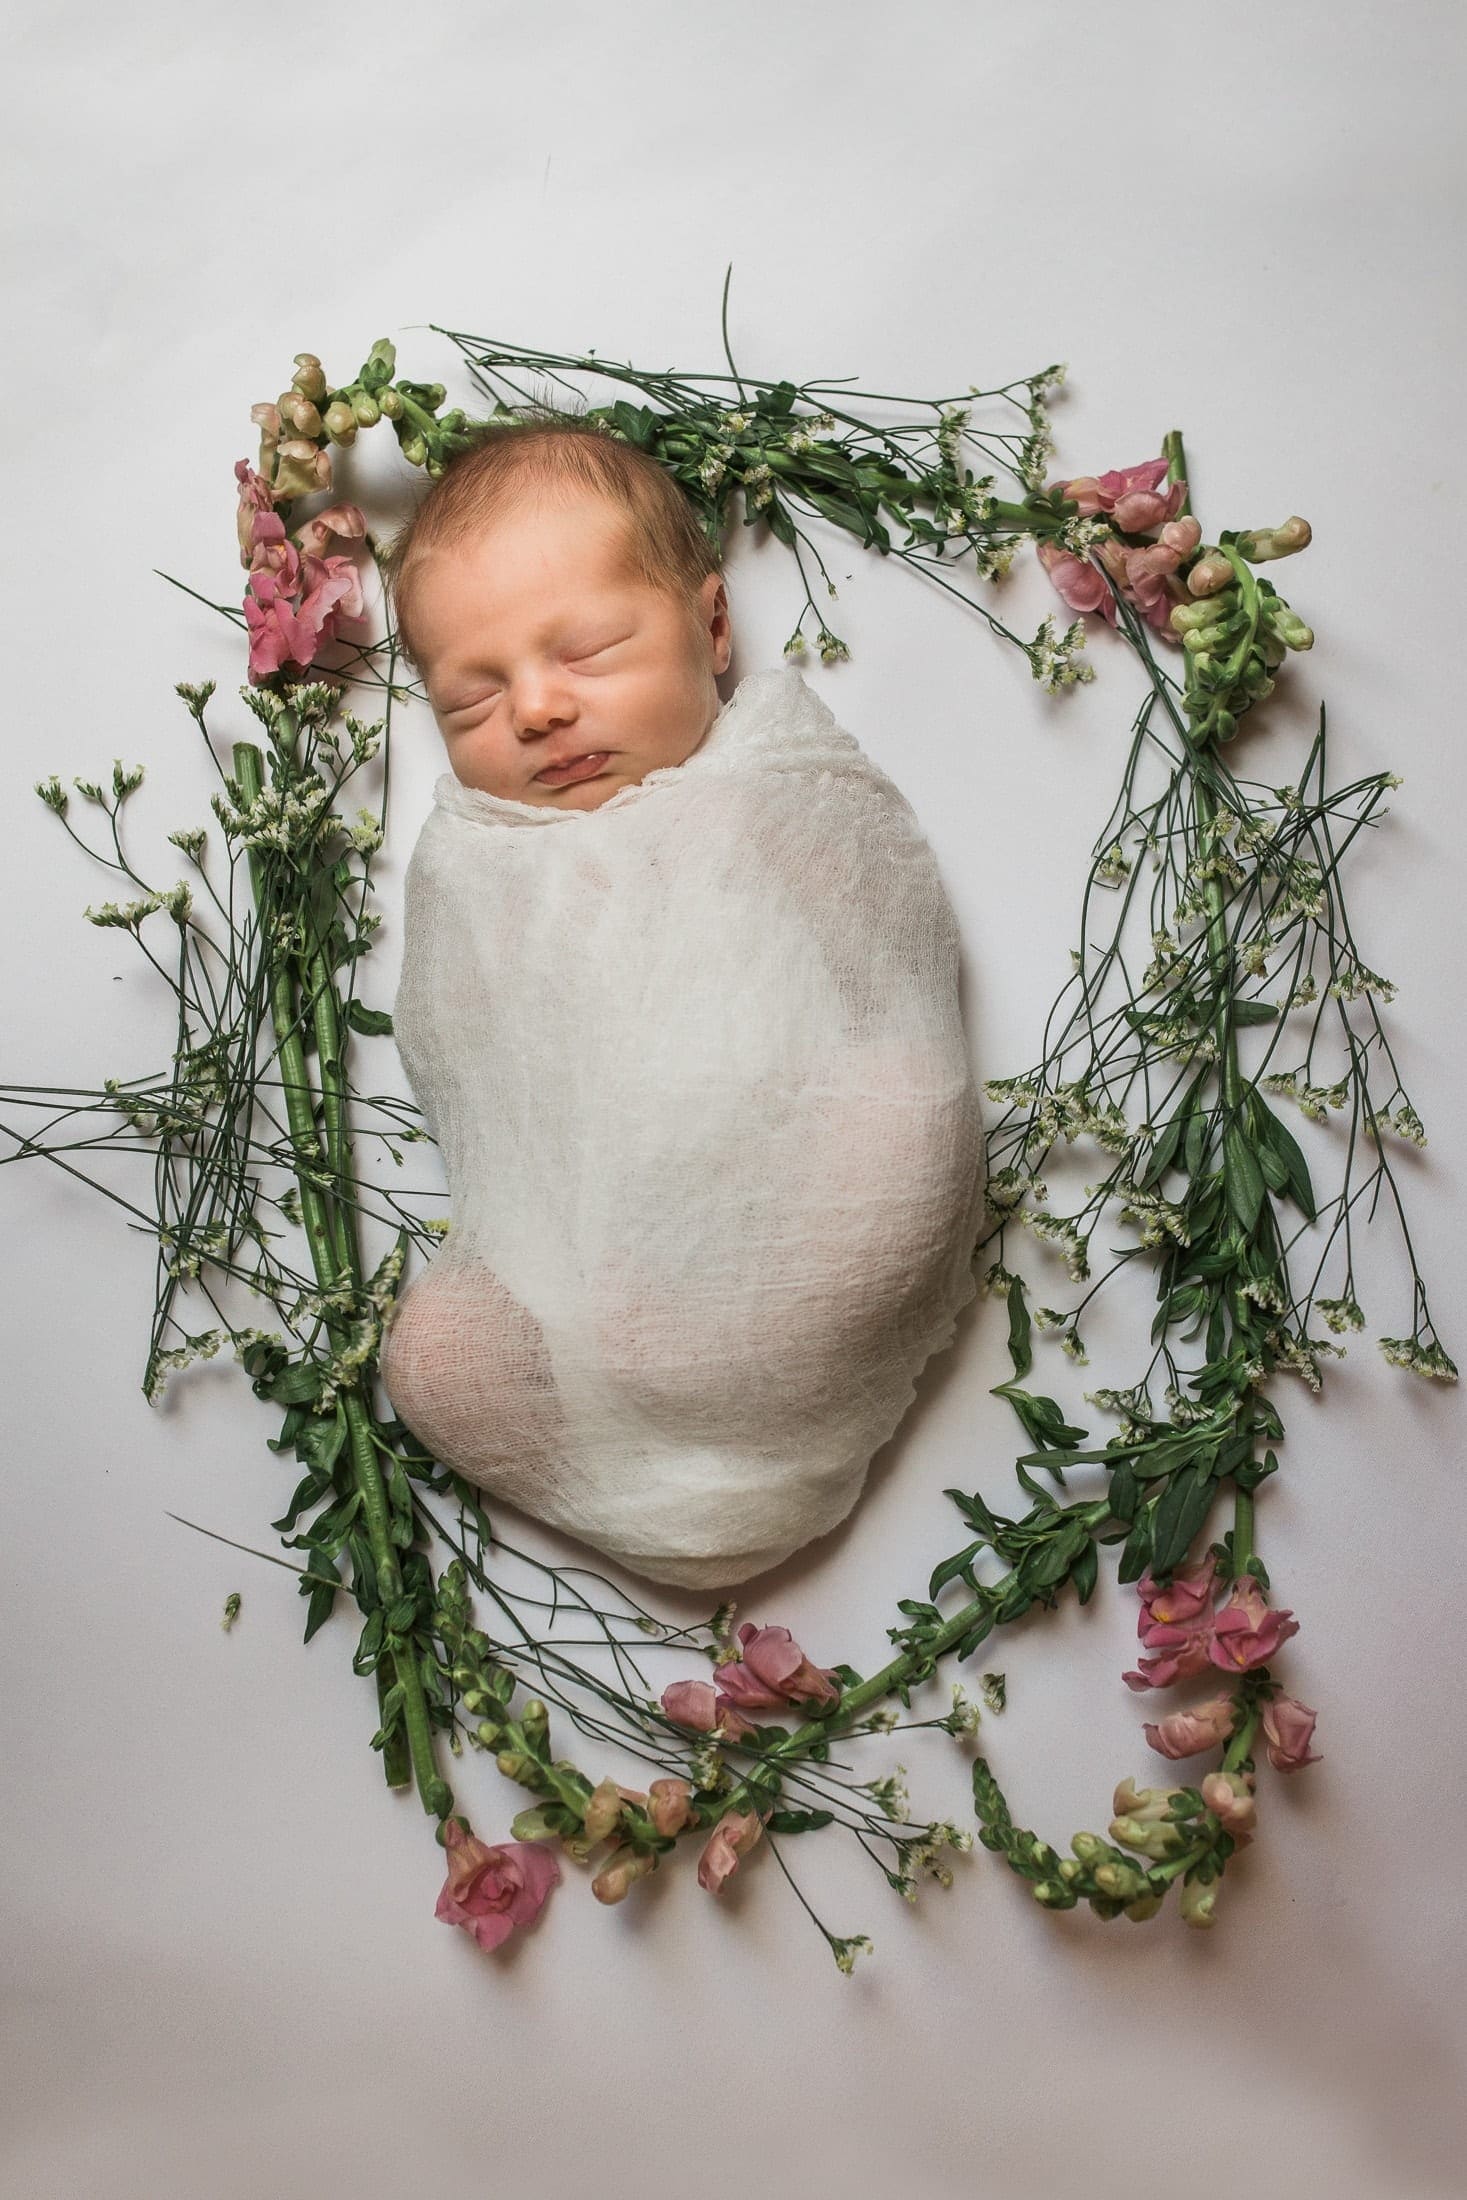 Baby surrounded by flowers